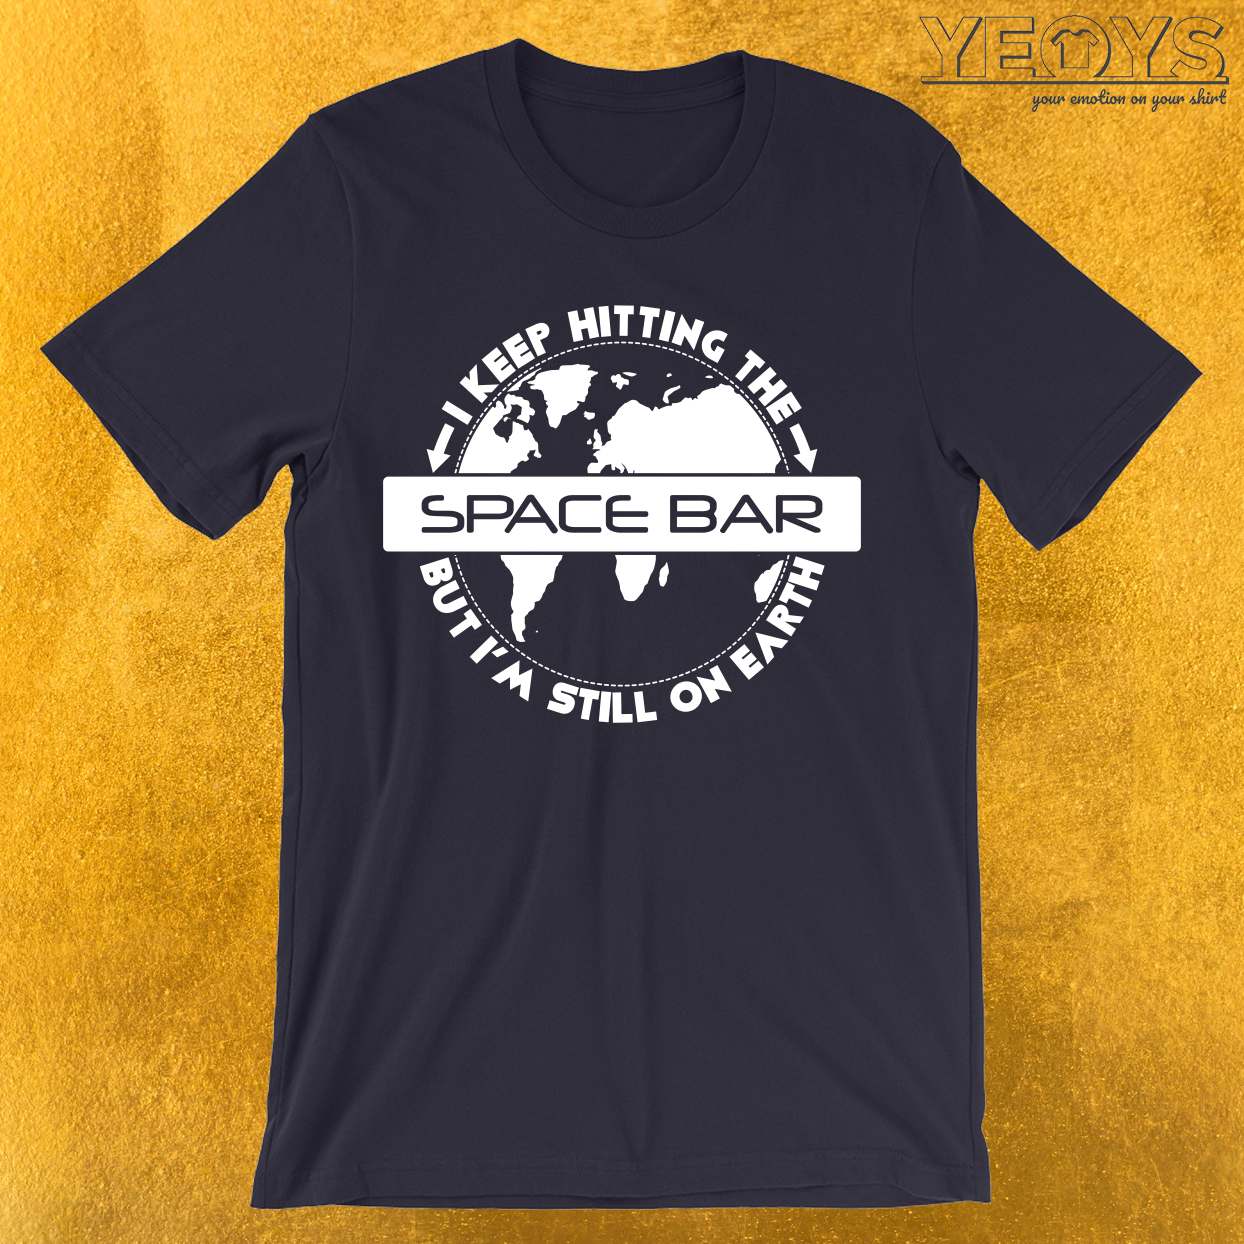 Space Bar But I’m Still On Earth T-Shirt